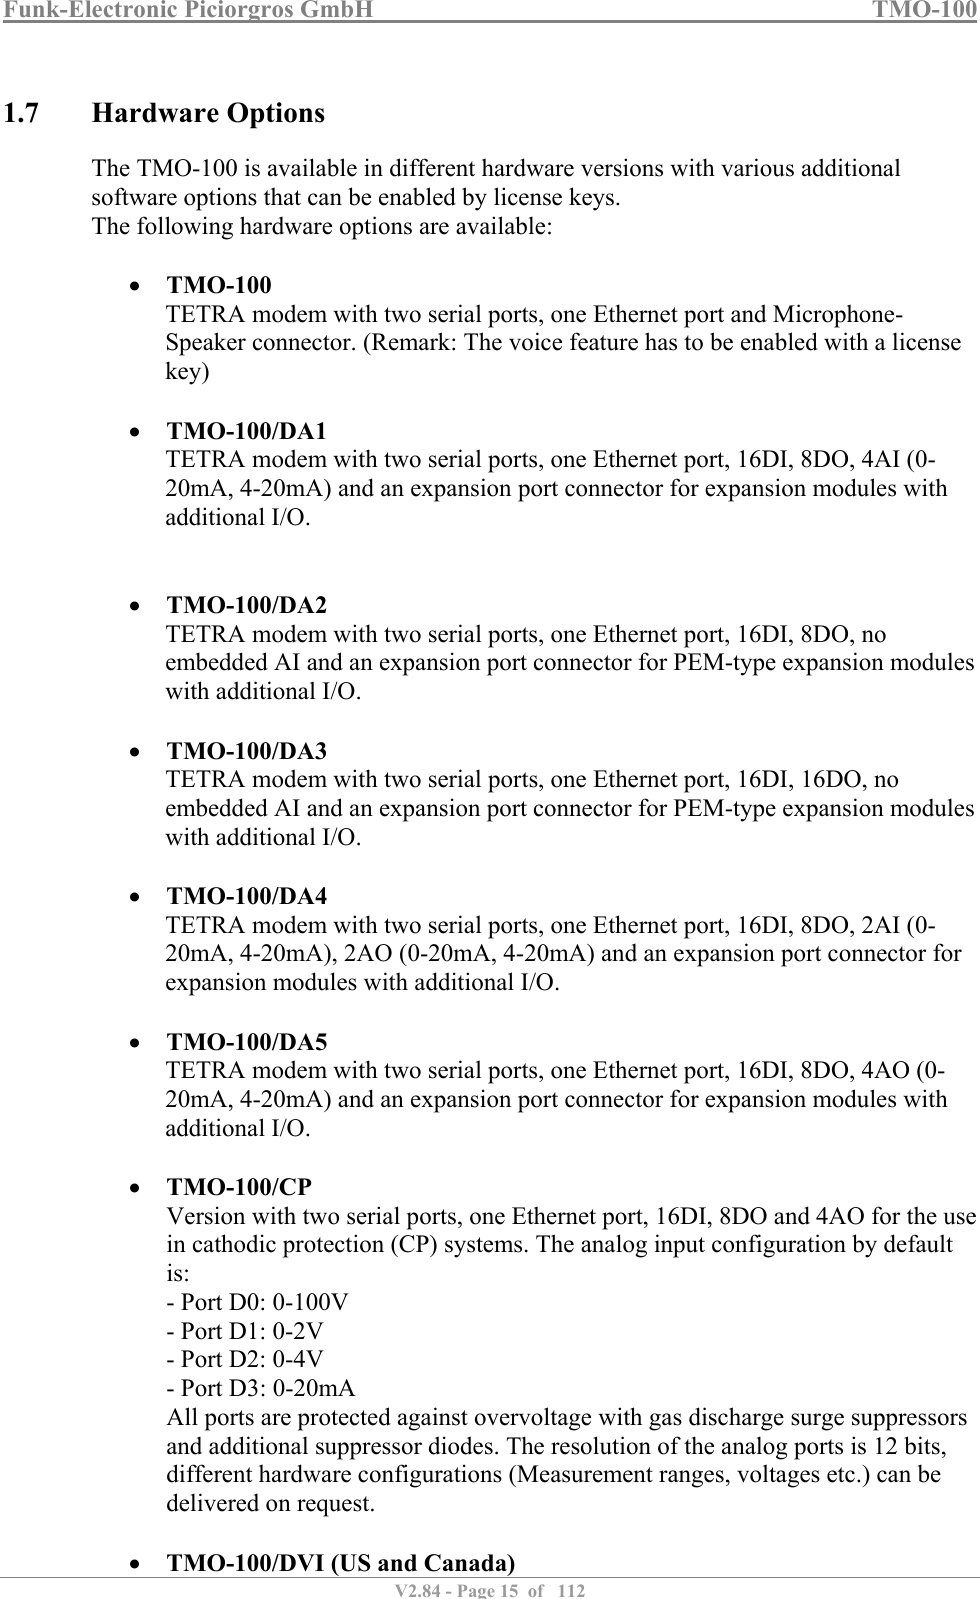 Funk-Electronic Piciorgros GmbH   TMO-100   V2.84 - Page 15  of   112   1.7 Hardware Options The TMO-100 is available in different hardware versions with various additional software options that can be enabled by license keys. The following hardware options are available:   TMO-100 TETRA modem with two serial ports, one Ethernet port and Microphone-Speaker connector. (Remark: The voice feature has to be enabled with a license key)   TMO-100/DA1 TETRA modem with two serial ports, one Ethernet port, 16DI, 8DO, 4AI (0-20mA, 4-20mA) and an expansion port connector for expansion modules with additional I/O.    TMO-100/DA2 TETRA modem with two serial ports, one Ethernet port, 16DI, 8DO, no embedded AI and an expansion port connector for PEM-type expansion modules with additional I/O.   TMO-100/DA3 TETRA modem with two serial ports, one Ethernet port, 16DI, 16DO, no embedded AI and an expansion port connector for PEM-type expansion modules with additional I/O.   TMO-100/DA4 TETRA modem with two serial ports, one Ethernet port, 16DI, 8DO, 2AI (0-20mA, 4-20mA), 2AO (0-20mA, 4-20mA) and an expansion port connector for expansion modules with additional I/O.   TMO-100/DA5 TETRA modem with two serial ports, one Ethernet port, 16DI, 8DO, 4AO (0-20mA, 4-20mA) and an expansion port connector for expansion modules with additional I/O.   TMO-100/CP Version with two serial ports, one Ethernet port, 16DI, 8DO and 4AO for the use in cathodic protection (CP) systems. The analog input configuration by default is: - Port D0: 0-100V - Port D1: 0-2V - Port D2: 0-4V - Port D3: 0-20mA All ports are protected against overvoltage with gas discharge surge suppressors and additional suppressor diodes. The resolution of the analog ports is 12 bits, different hardware configurations (Measurement ranges, voltages etc.) can be delivered on request.   TMO-100/DVI (US and Canada) 